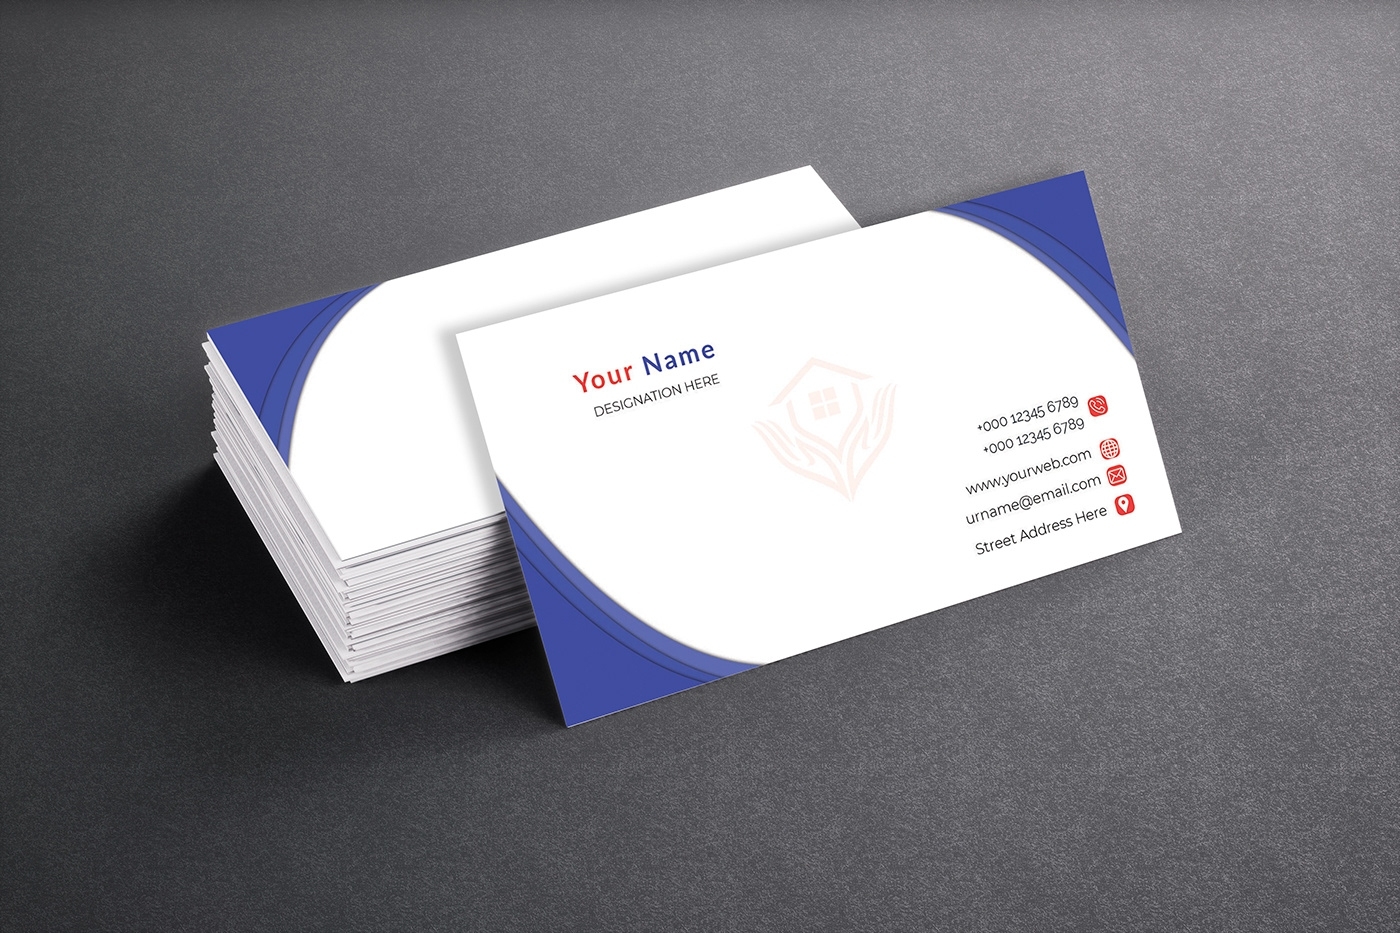 Print Business Card – Free Business Card Template Psd For Print – Free Intended For Free Template Business Cards To Print